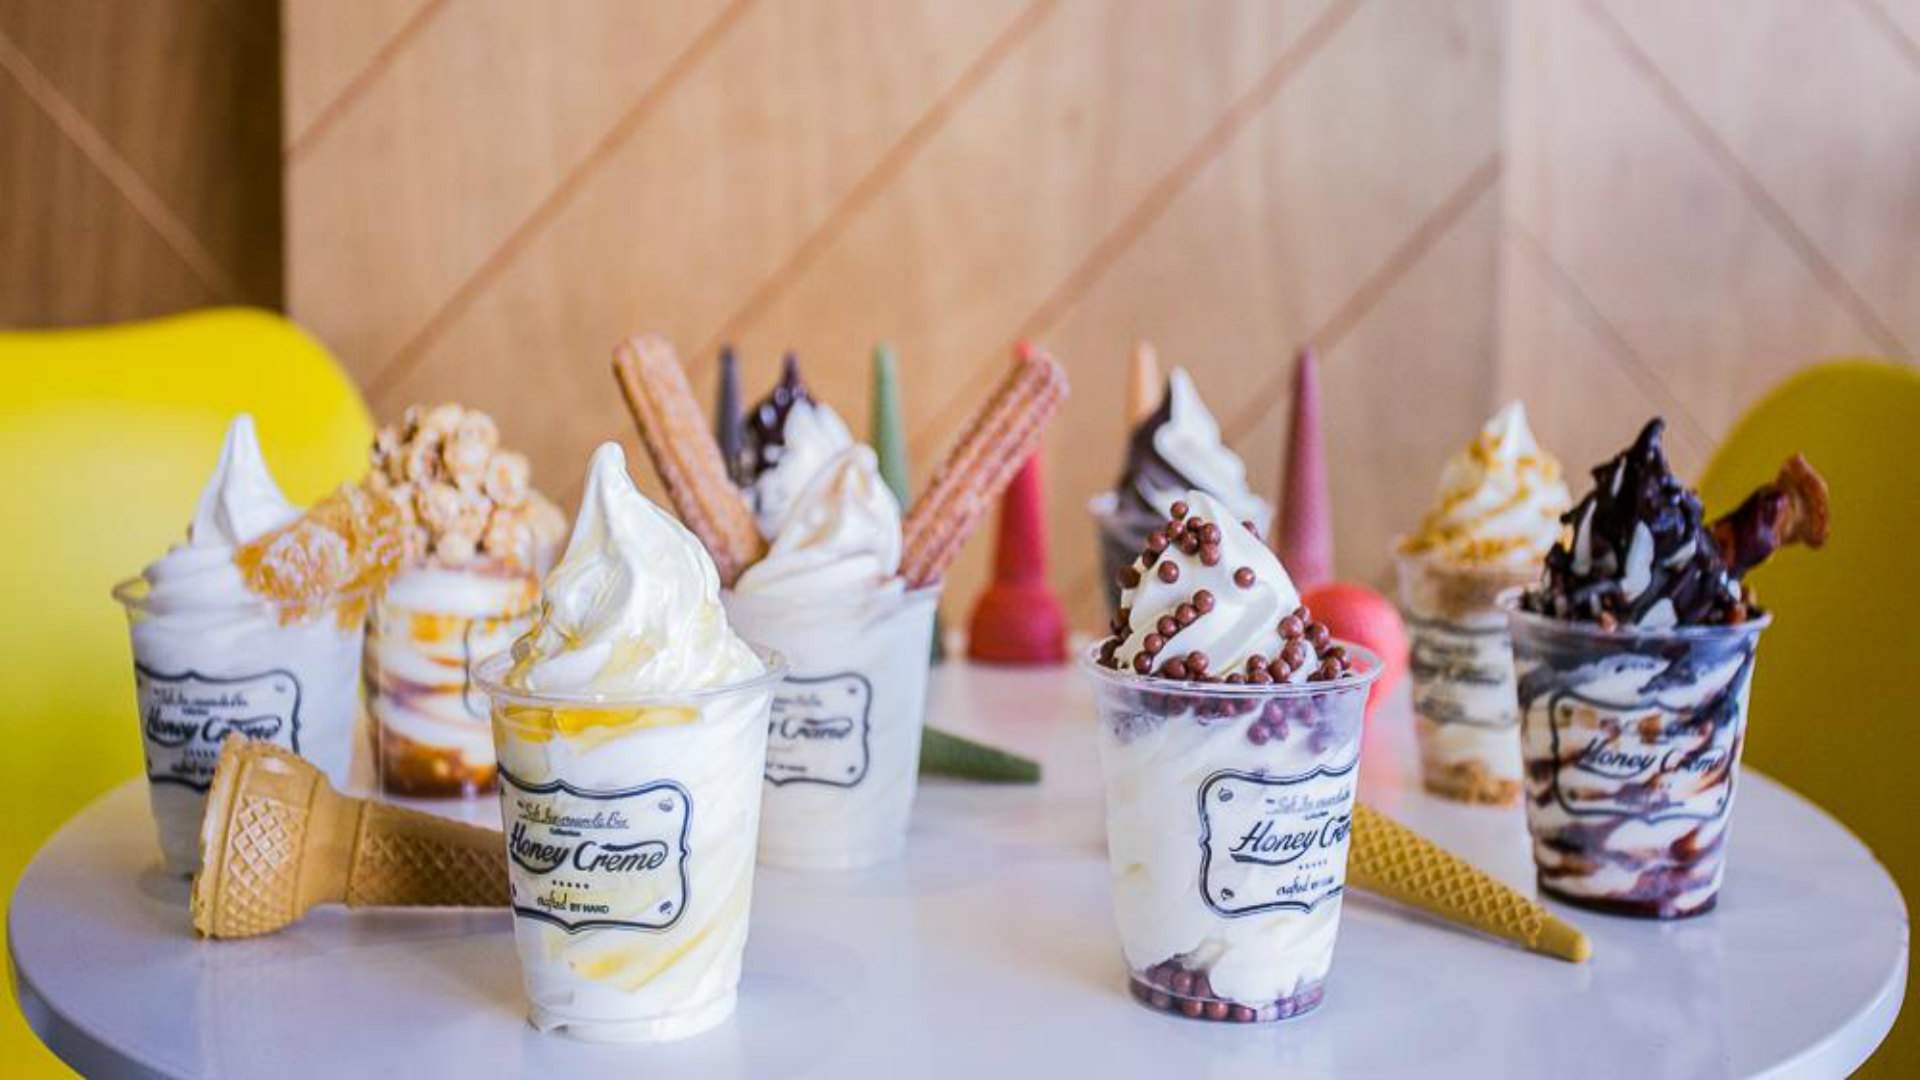 Taiwan's Honey Creme Brings Bacon Soft Serve to Sydney